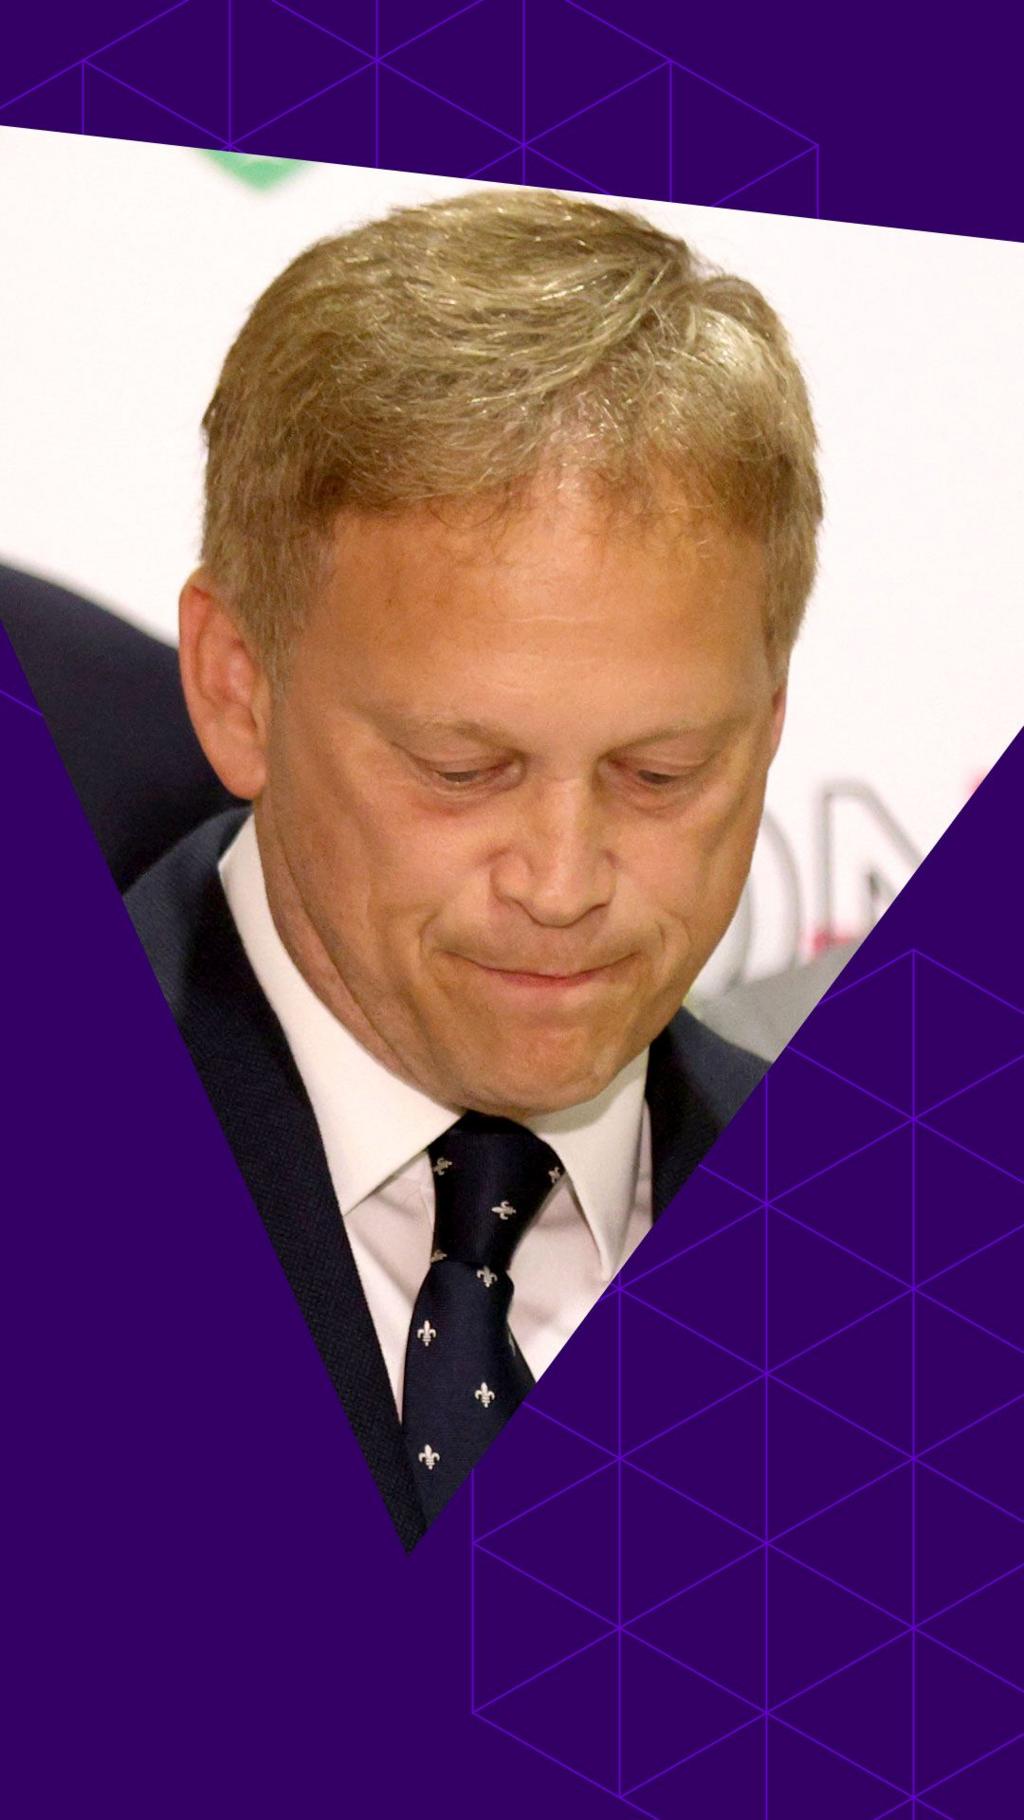 Grant Shapps looks down as he speaks, with lips pursed